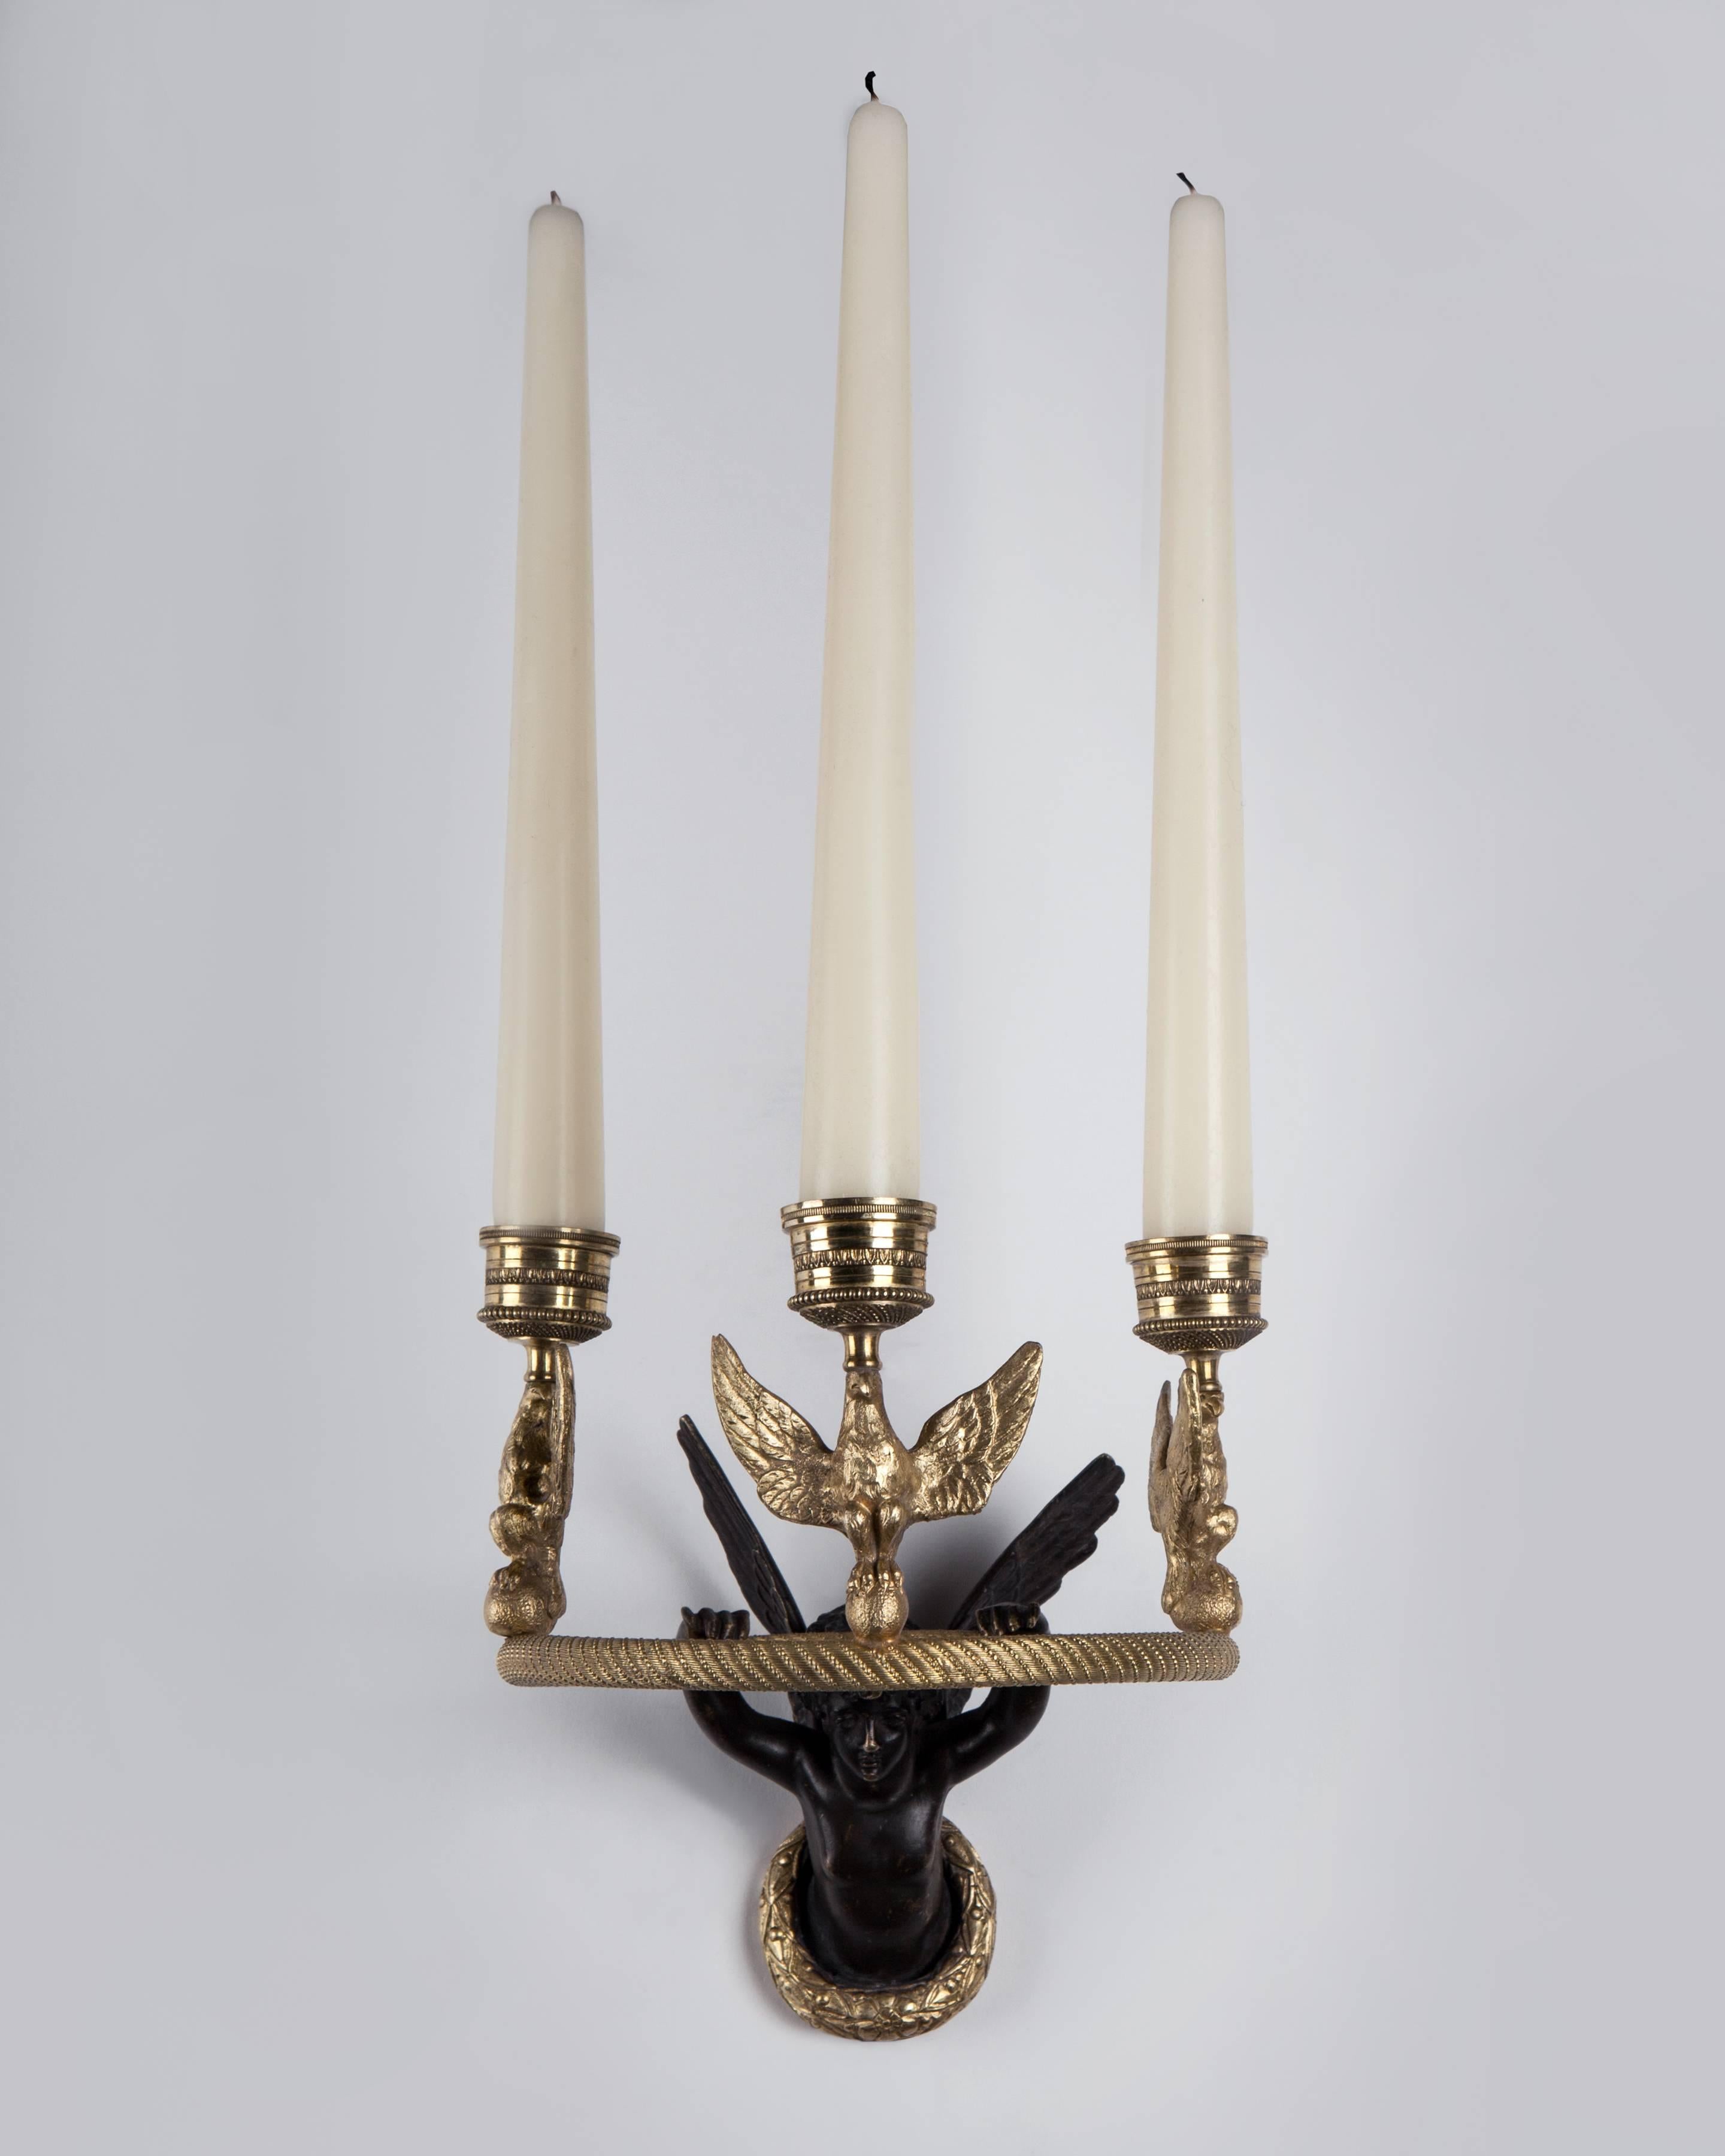 AIS3010

A single gilded and patinated bronze candle sconce composed of a winged cherub or angel figure holding a fine, spiral bead-wrapped, reeded hoop, mounted with three eagles holding candle cups.

Dimensions:
Overall: 6-1/2